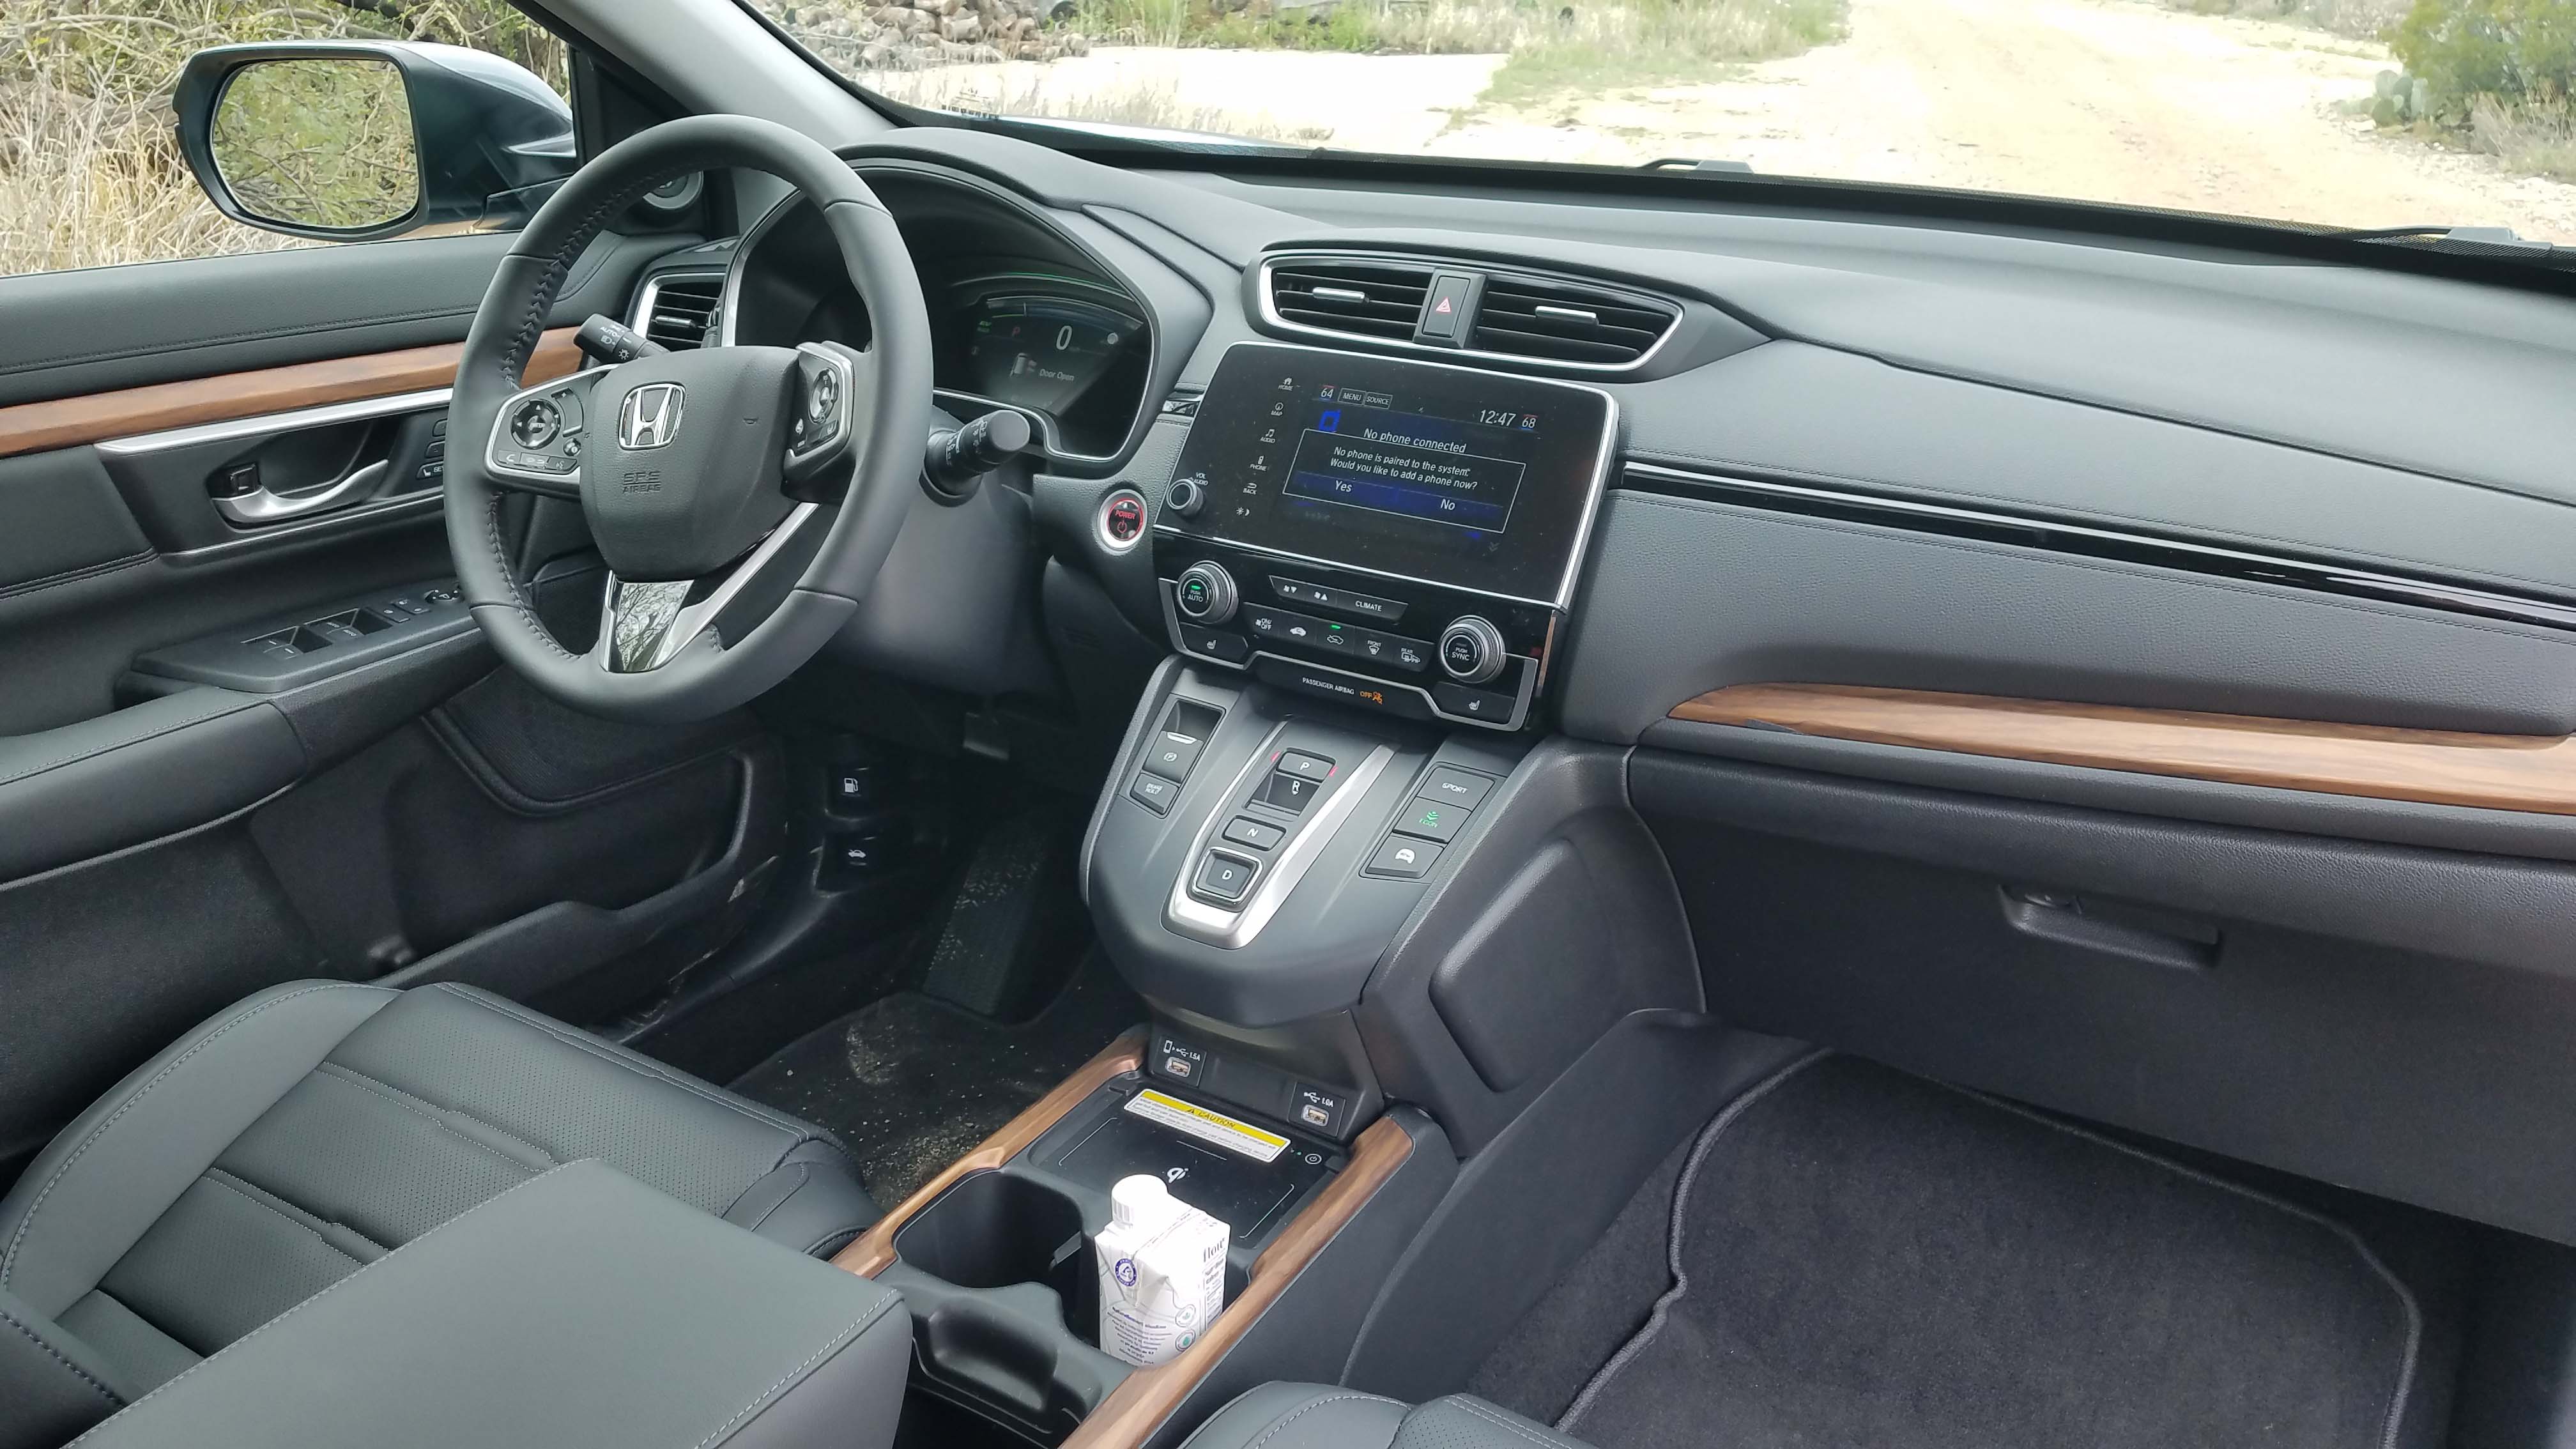 The interior of the 2020 Honda CR-V Hybrid is an easy place to get around with good storage, digital displays and smartphone connectivity.